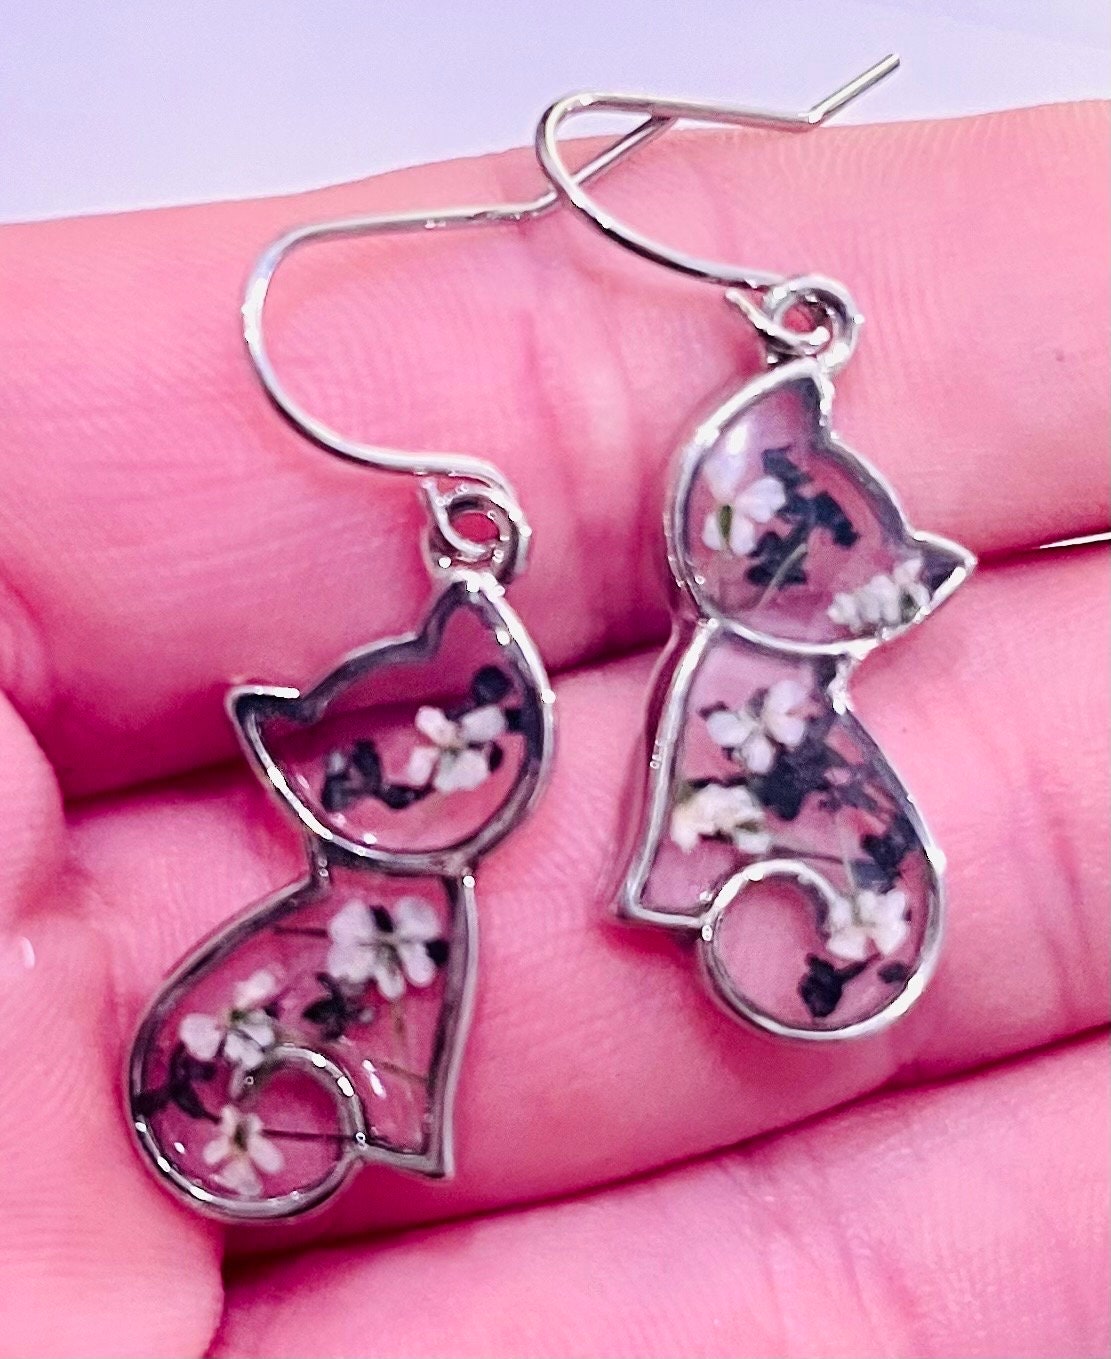 Tuxedo Cat Earrings made with Black and White Queen Anne’s lace flowers. 14K white gold plated earrings. 18K Gold Hoops. Special Gift for Cat Lovers.